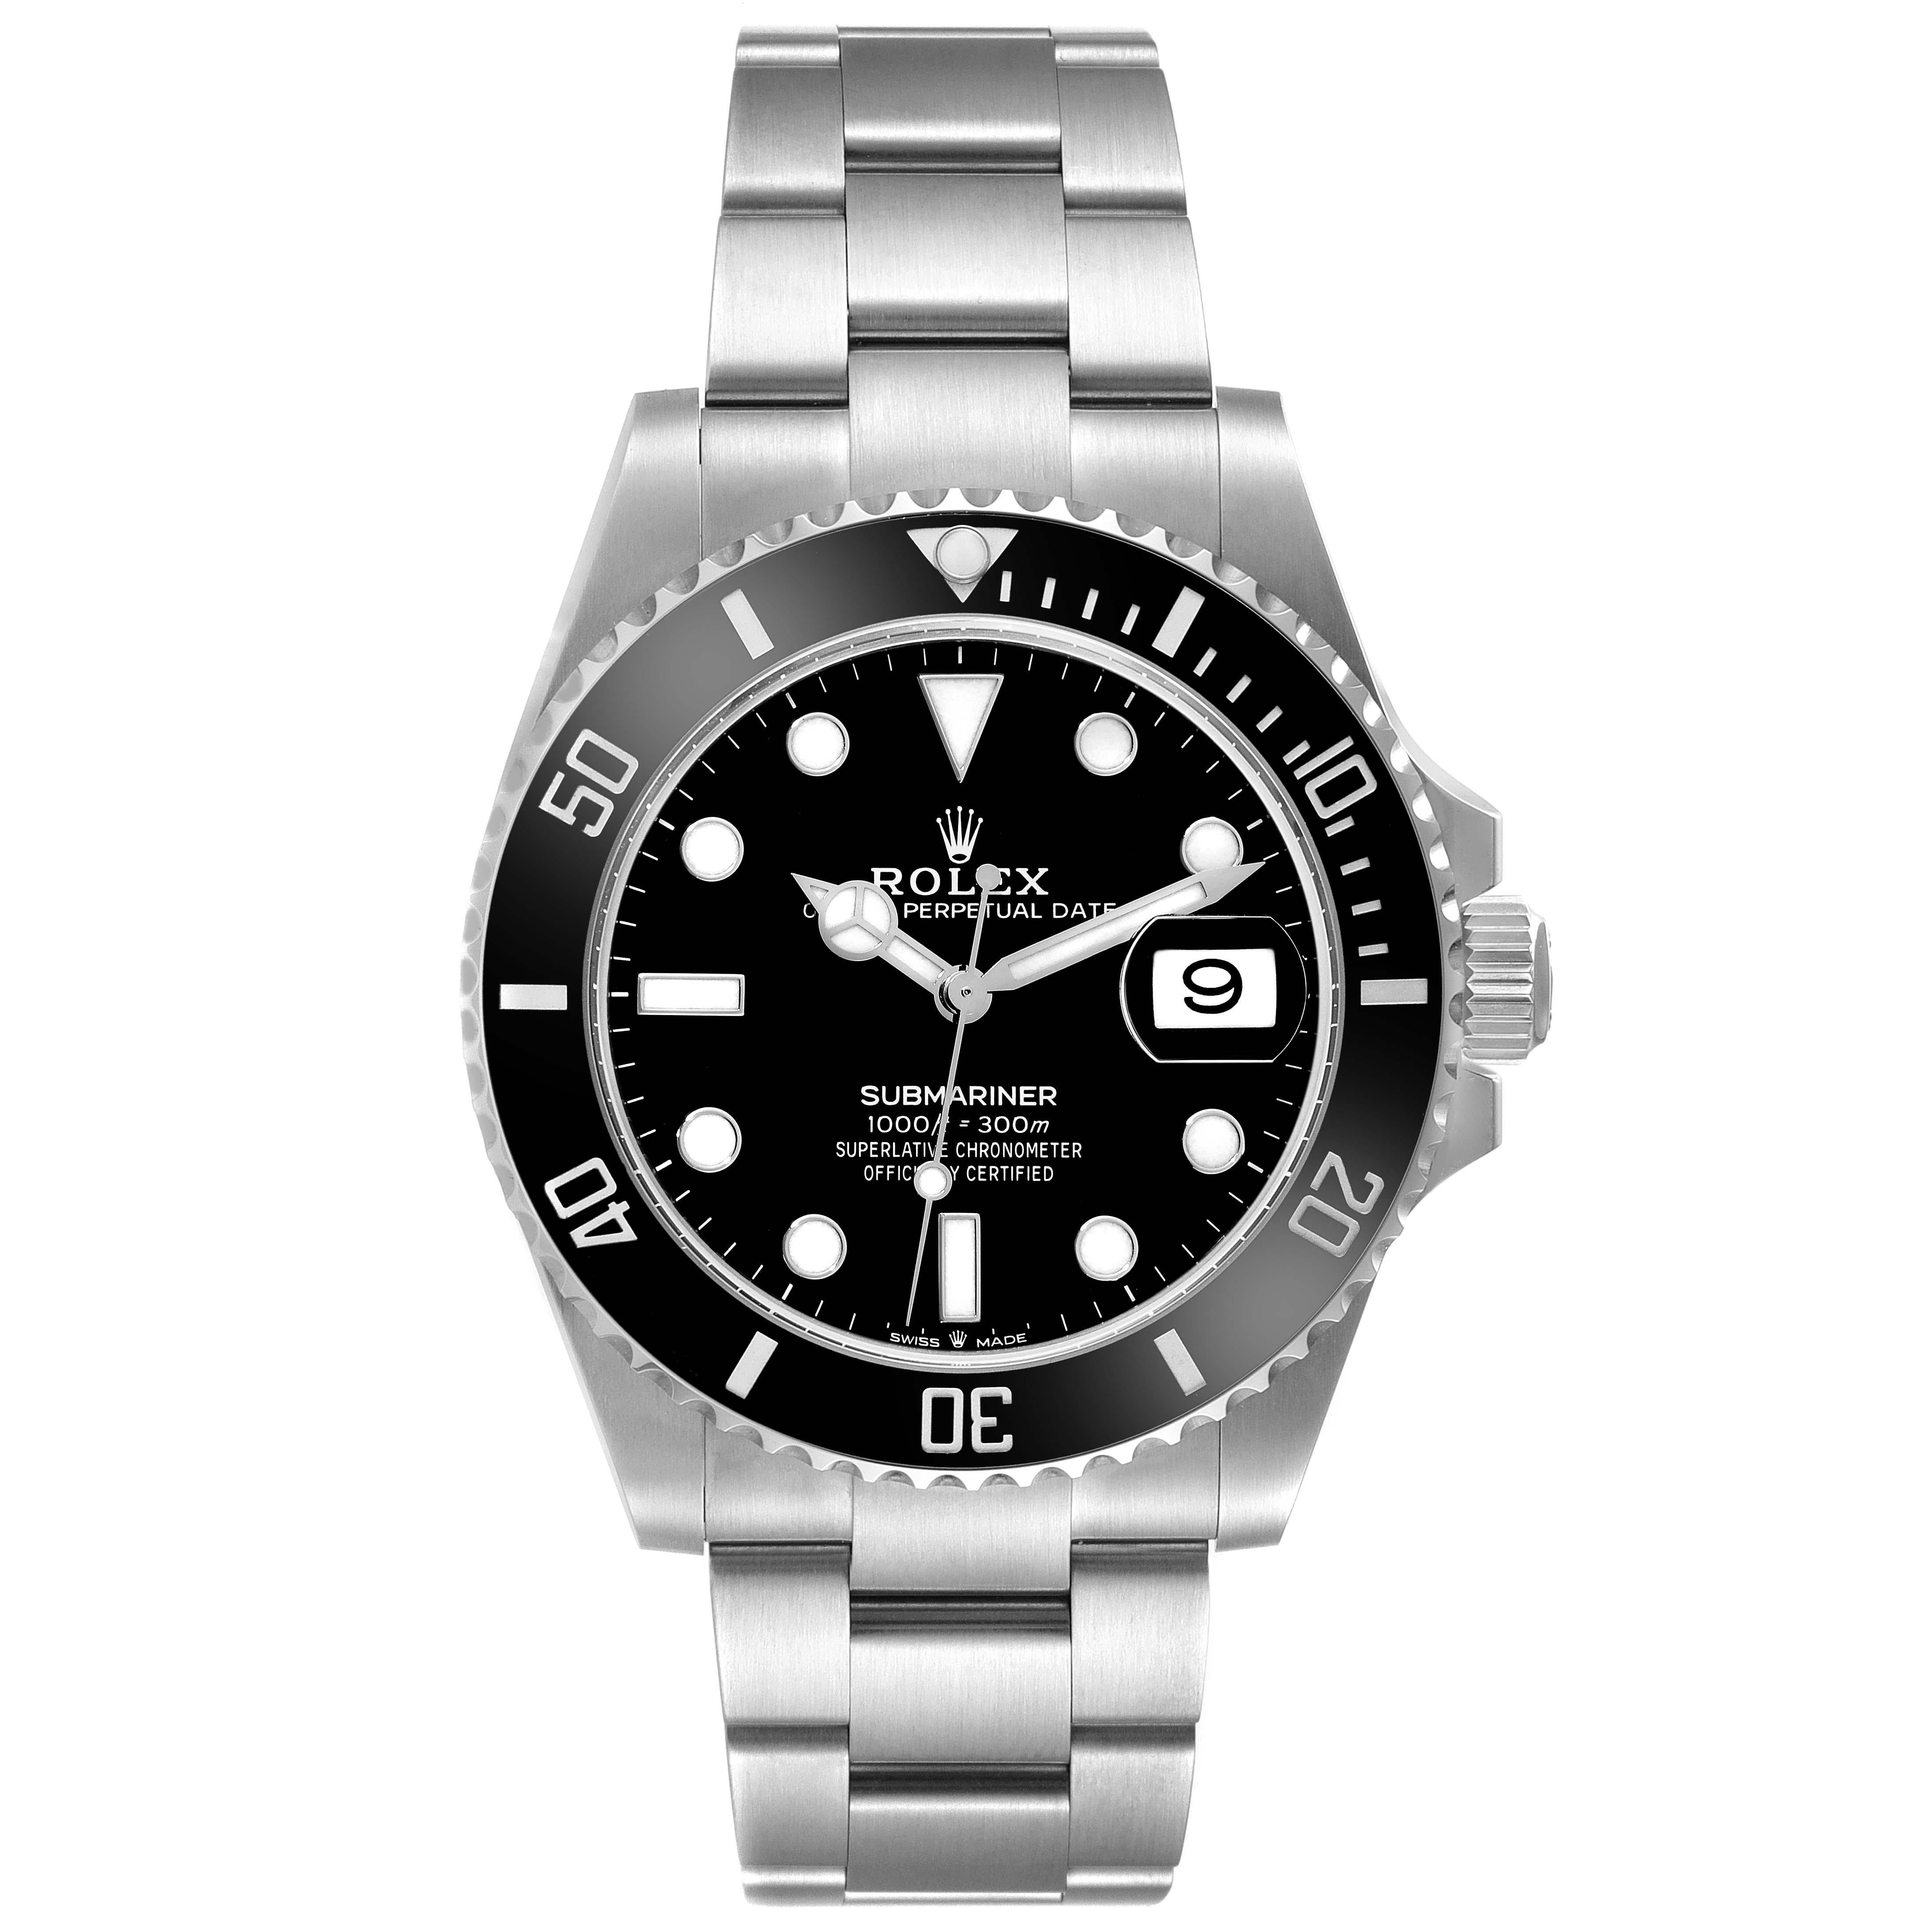 Rolex Submariner Black Dial Ceramic Bezel Steel Mens Watch 126610 Box Card. Officially certified chronometer automatic self-winding movement. Stainless steel case 41 mm in diameter. Rolex logo on the crown. Unidirectional rotating black ceramic